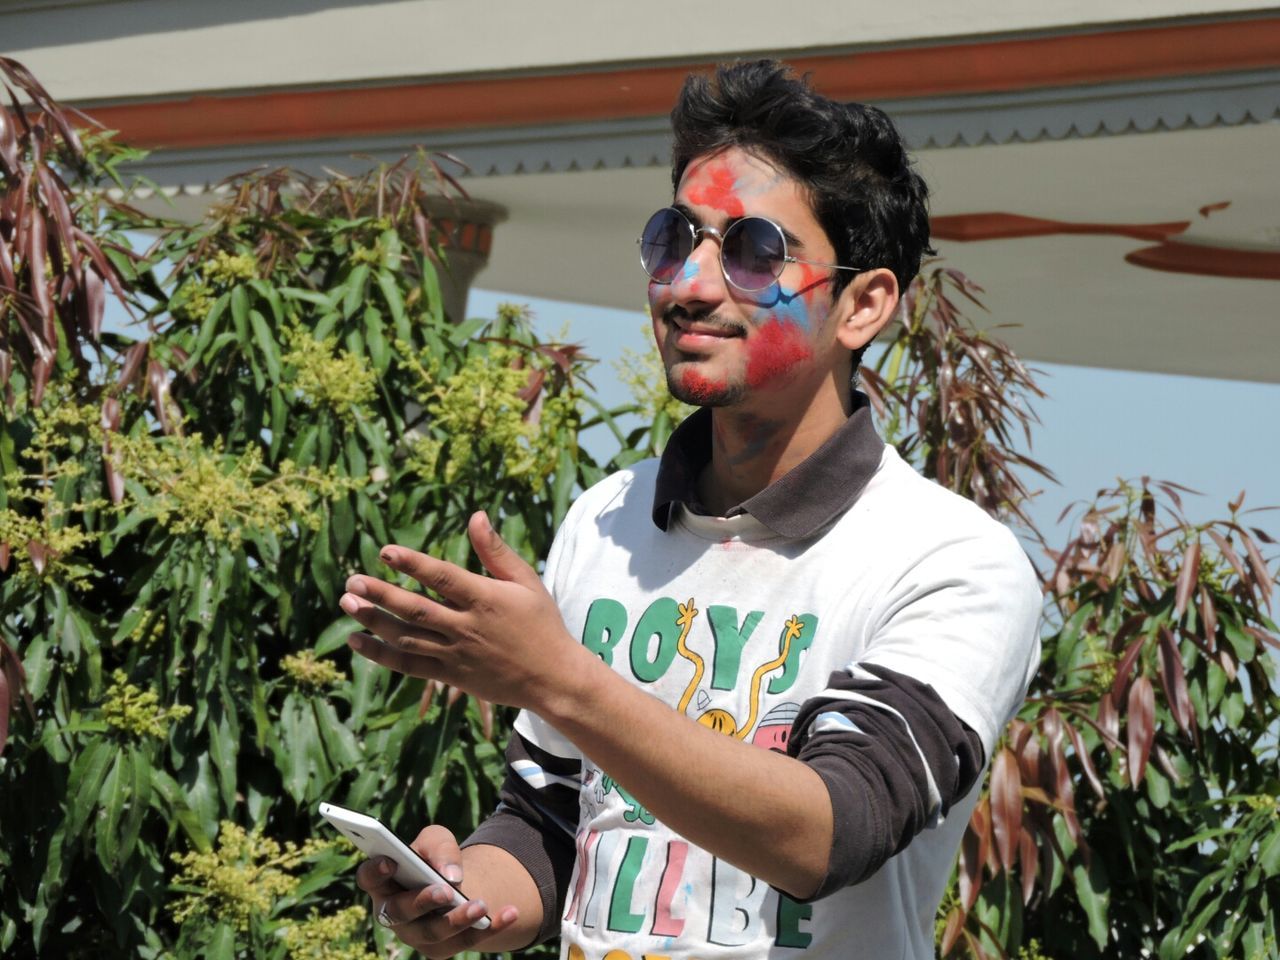 Young man with powder paint on face holding mobile phone while gesturing